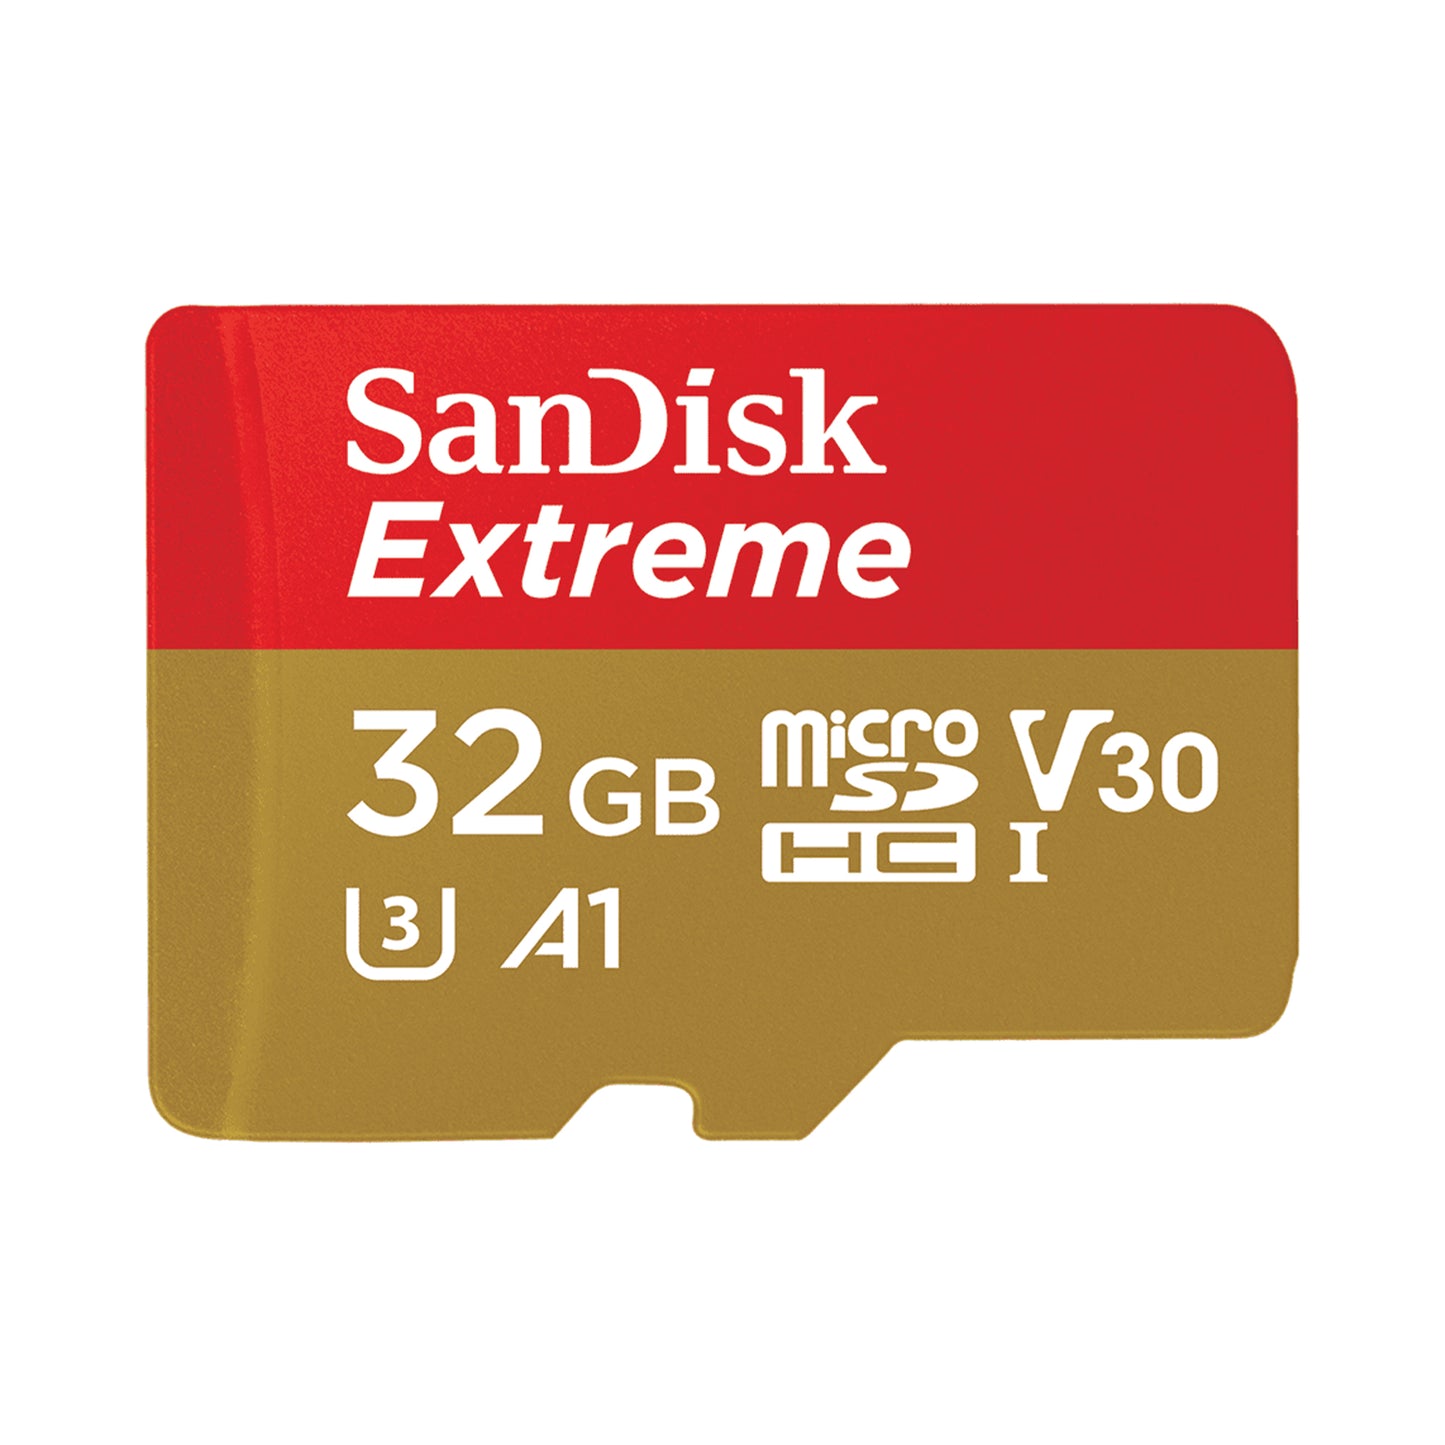 SANDISK Extreme Micro SD Card 32GB - Gold